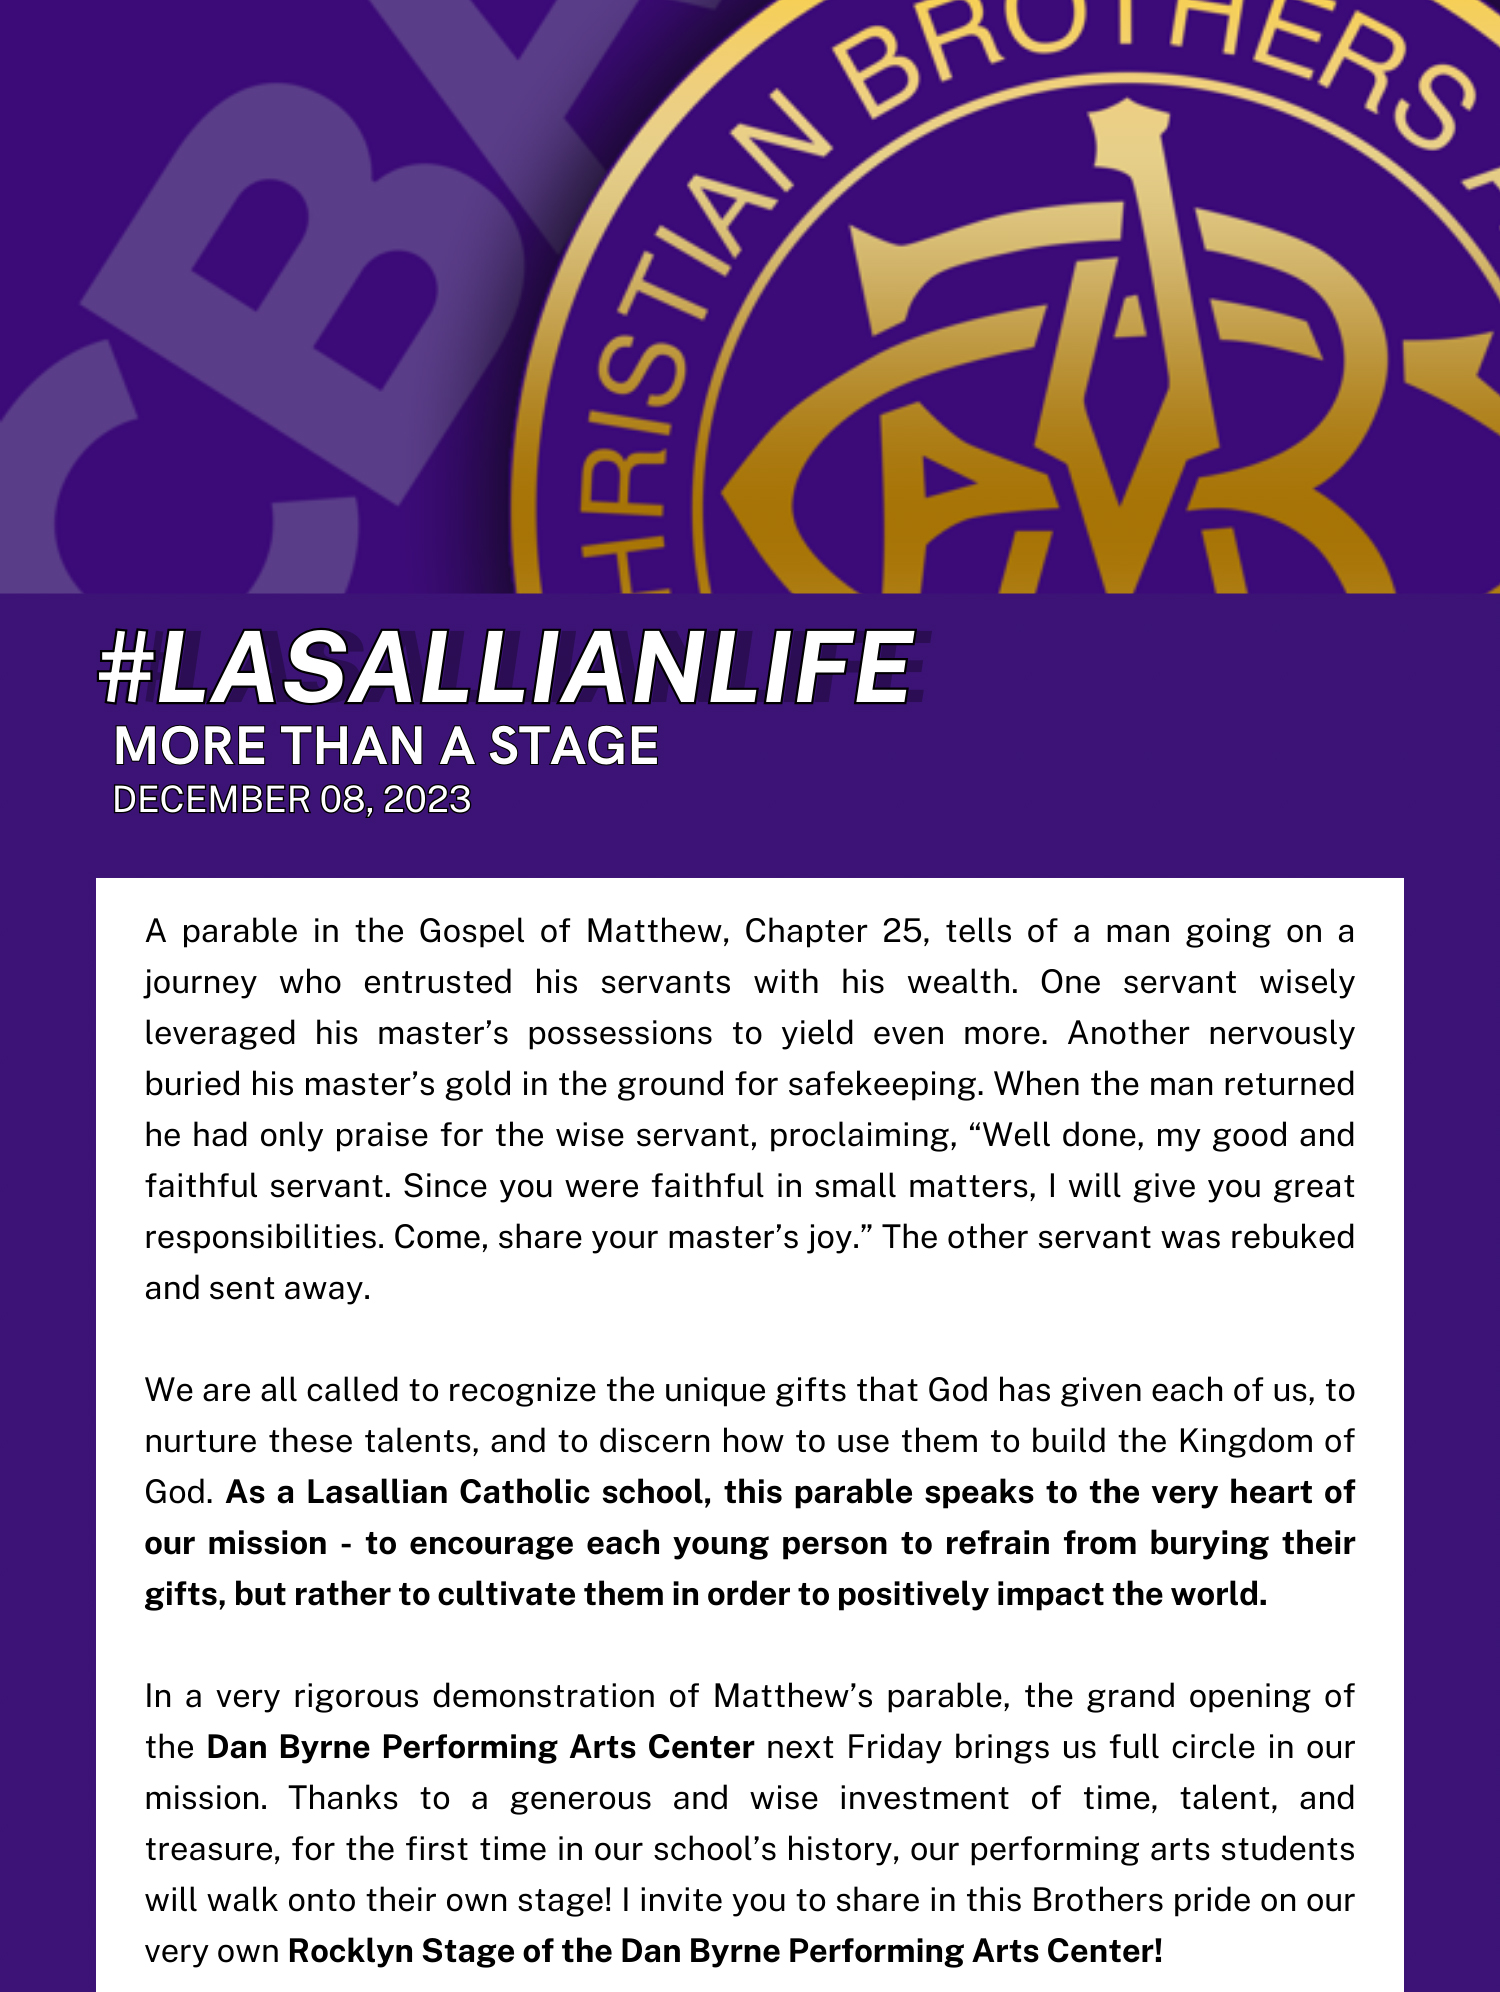 #LasallianLife : More Than a Stage